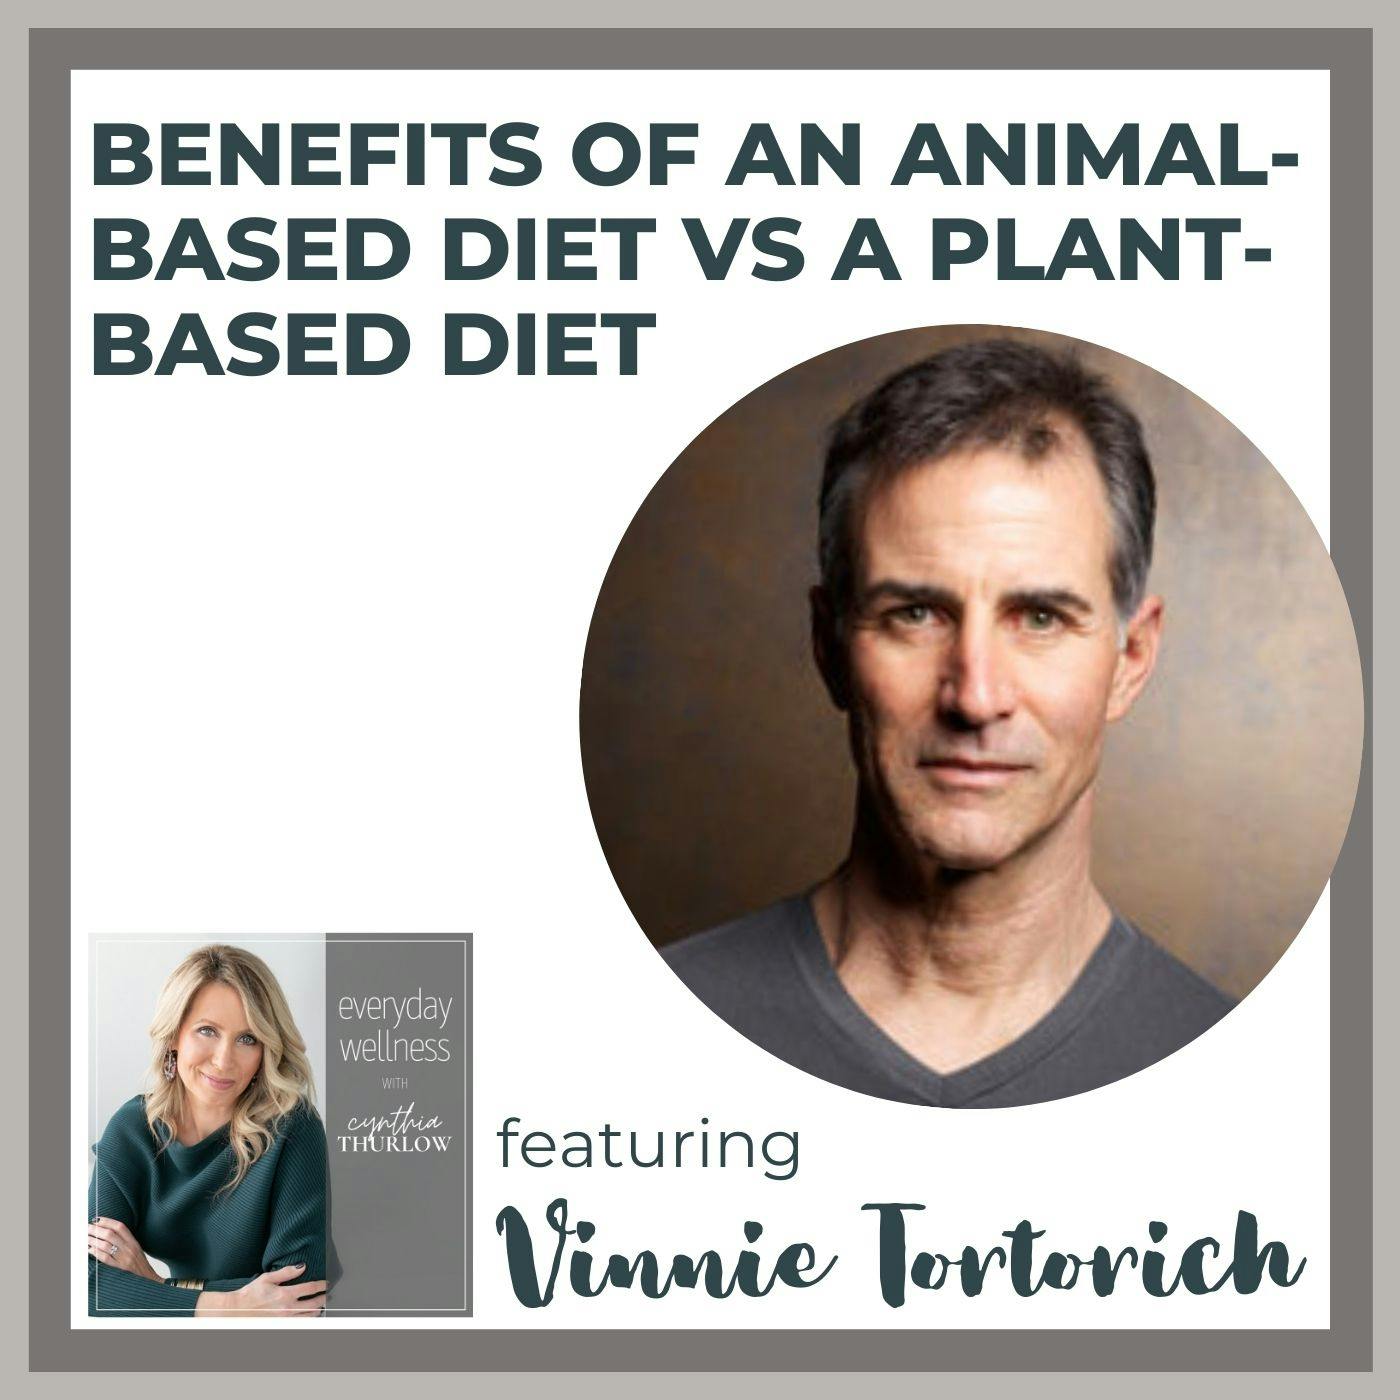 Ep.  191 Benefits of an Animal-Based Diet vs a Plant-Based Diet with Vinnie Tortorich